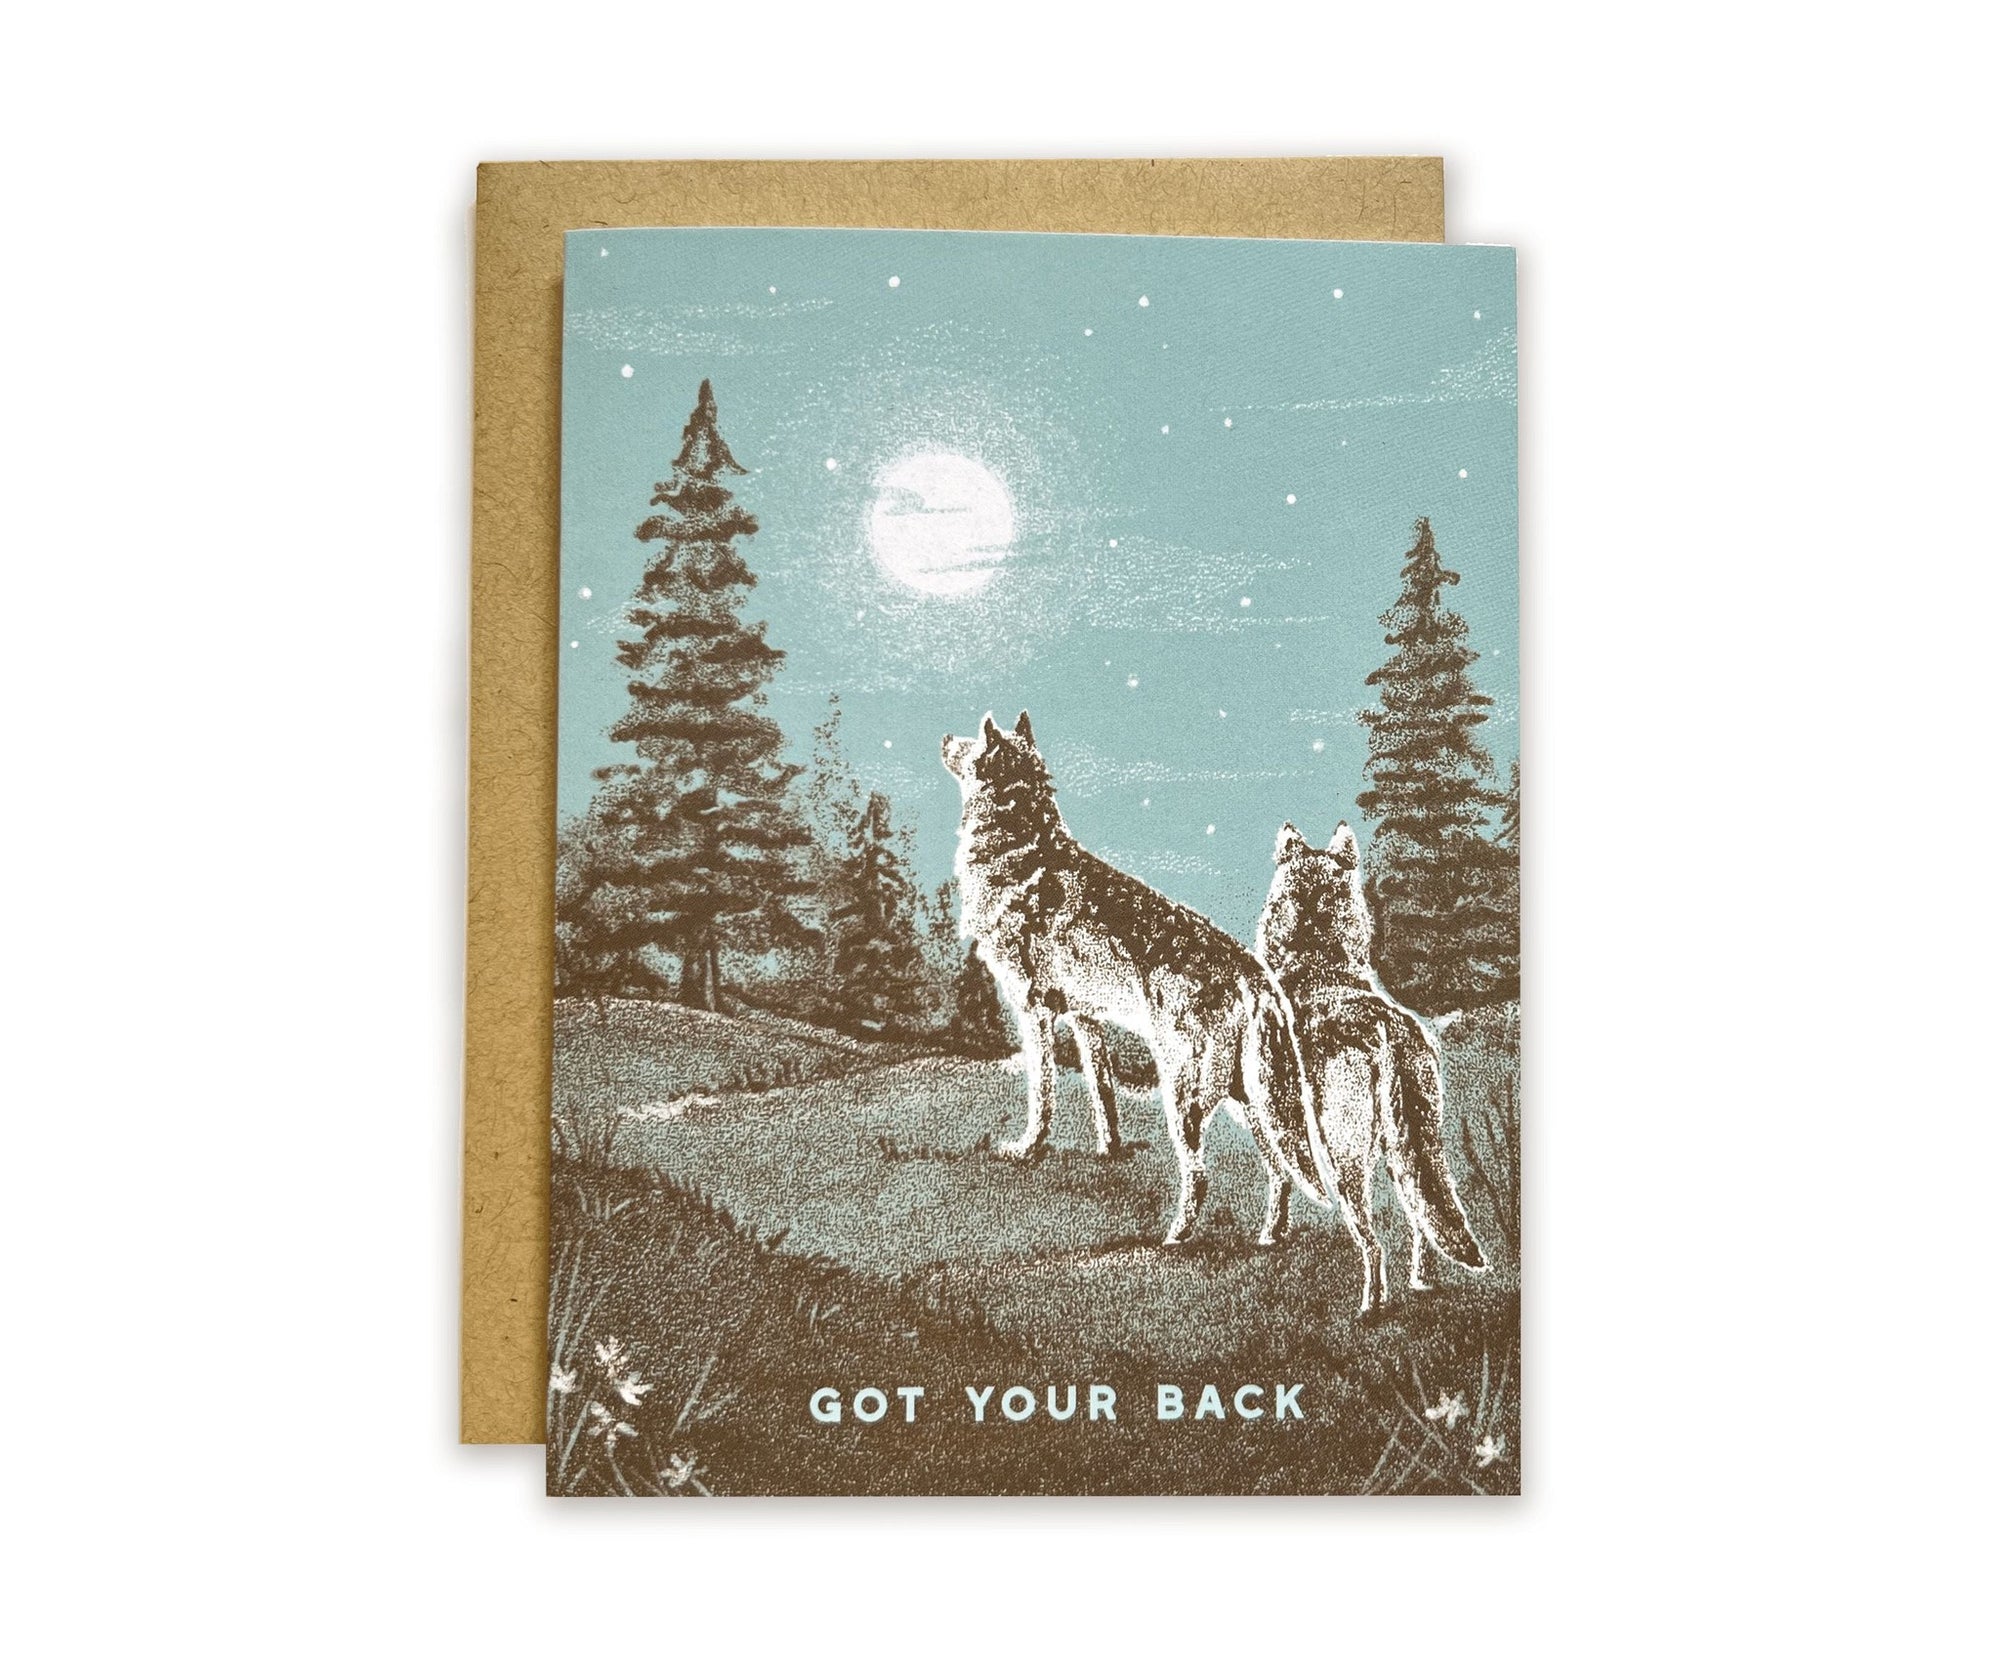 A Got Your Back Wolf Pack Greeting Card with two wolves looking at the moon and saying got your back, made by The Wild Wander.